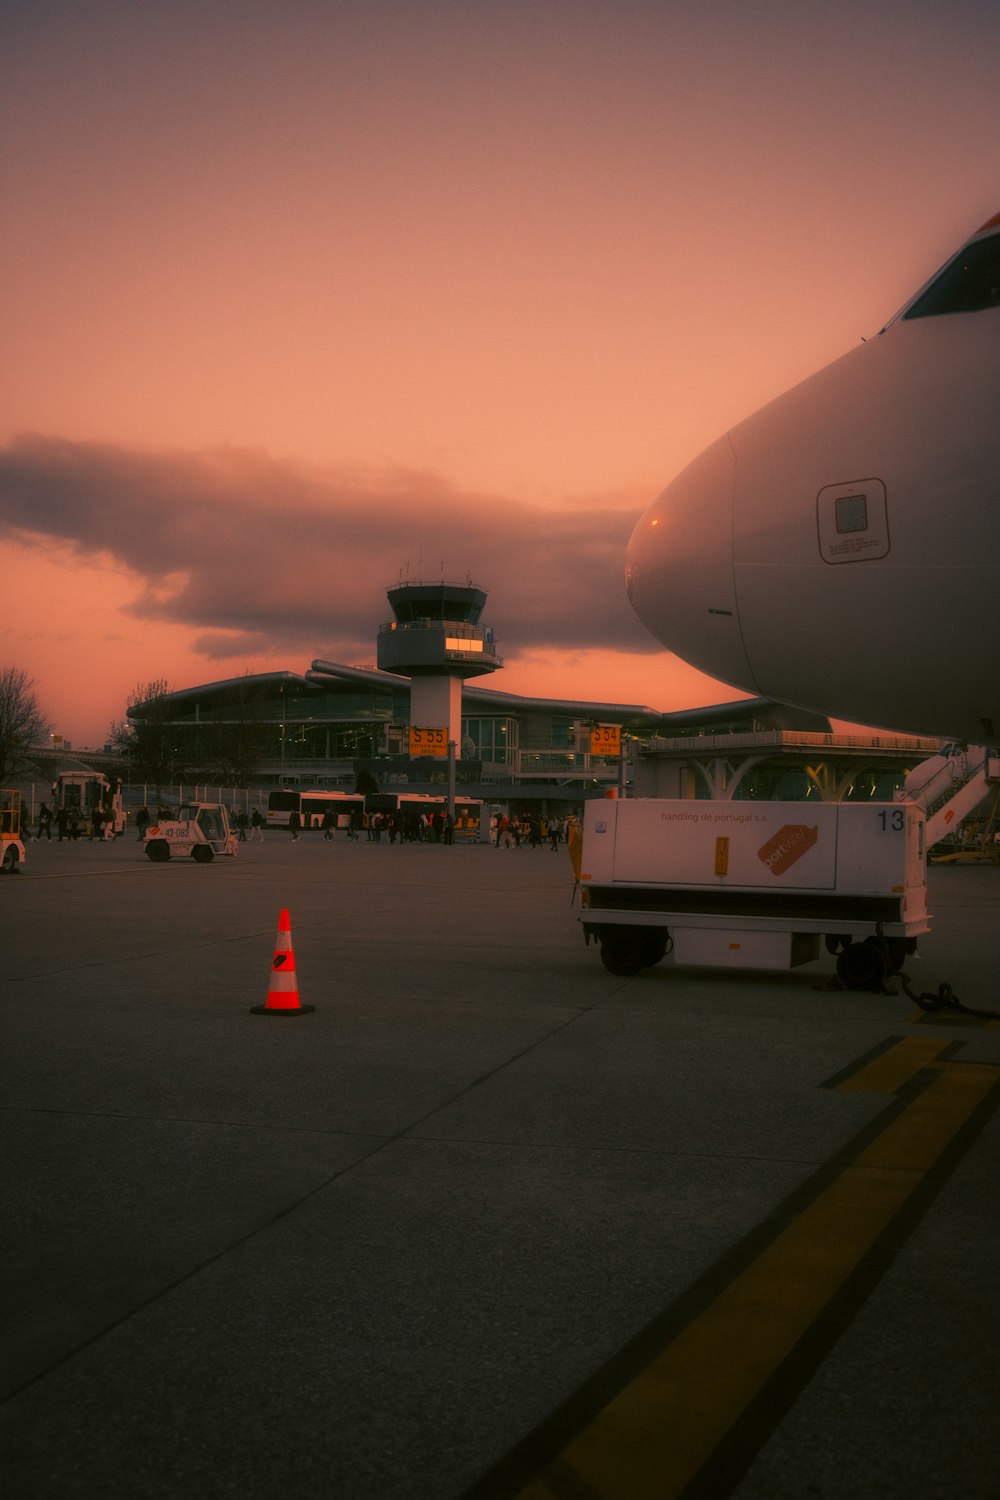 an airplane parked on the tarmac at sunset